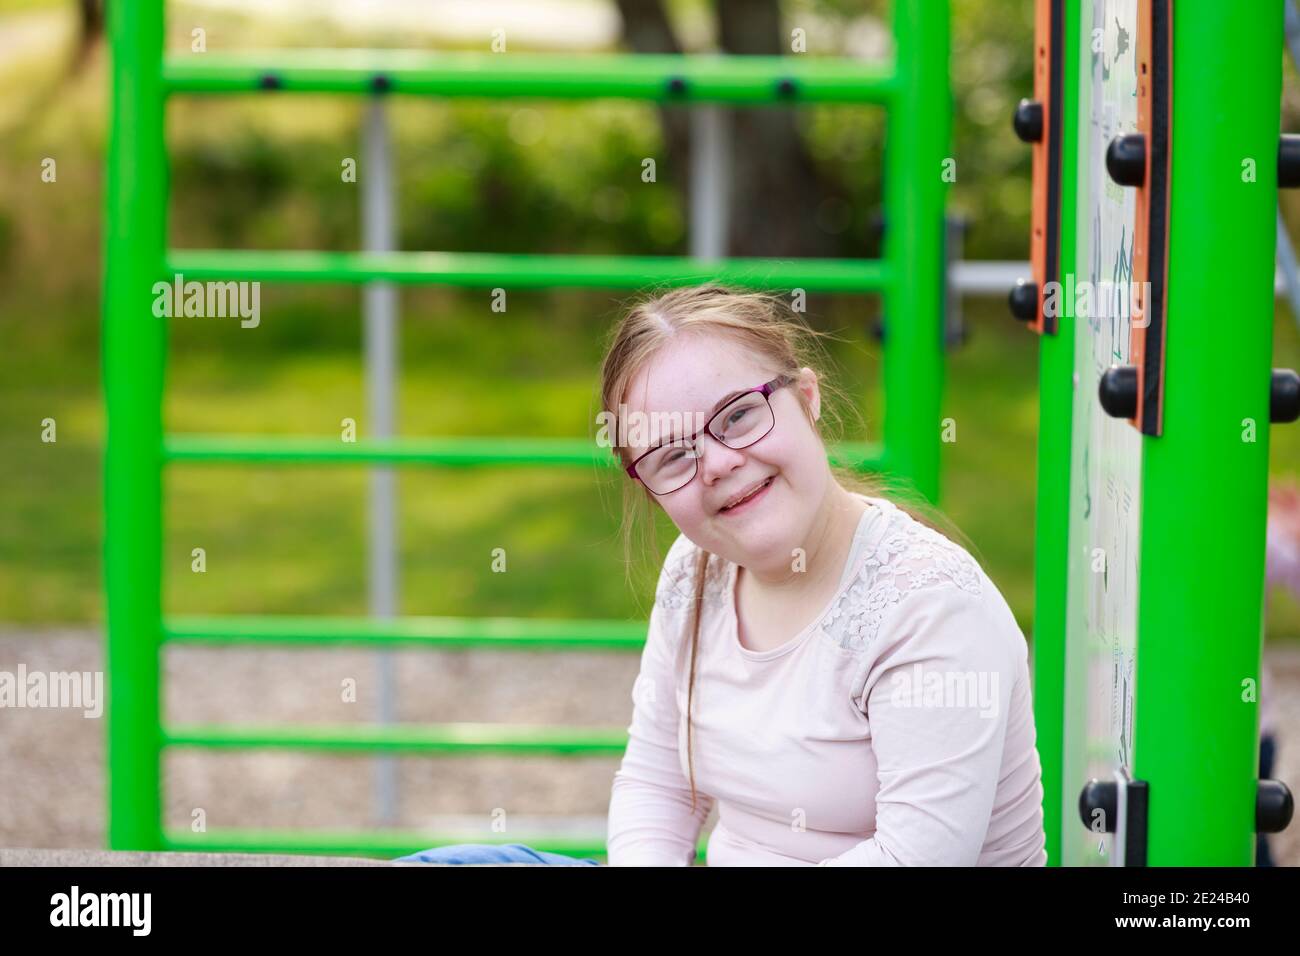 Smiling girl on playground looking at camera Stock Photo